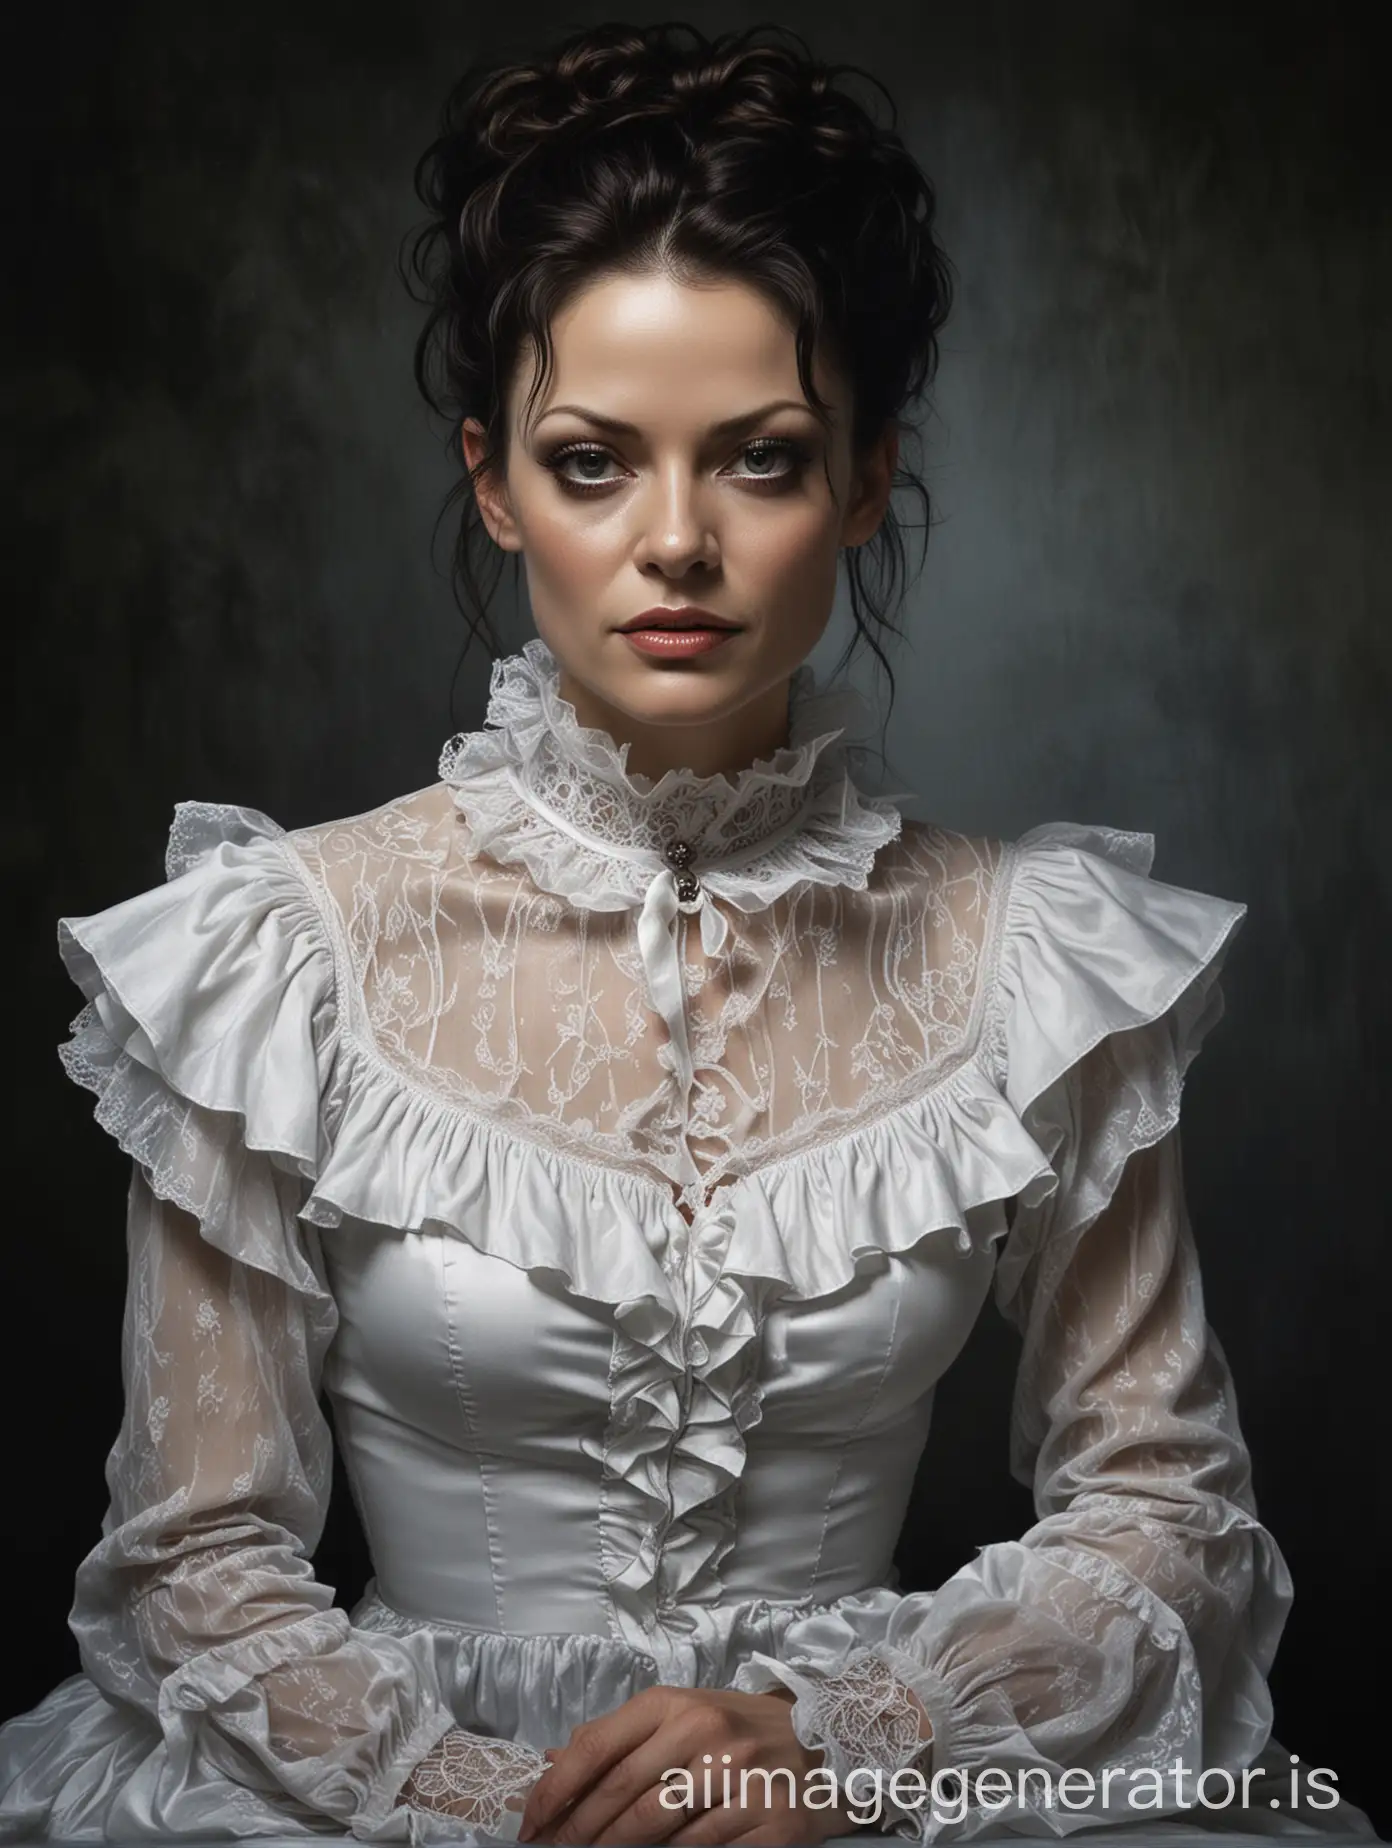 luis royo inspired dark art, Michelle Gomez face with white eyes, no makeup, serious face, wearing white long sleeve blouse with ruffles and lace with a white round collar, portrait, bright morning, bare neck, plain black backdrop, frontlight, sitting on a black satin block, updo hair